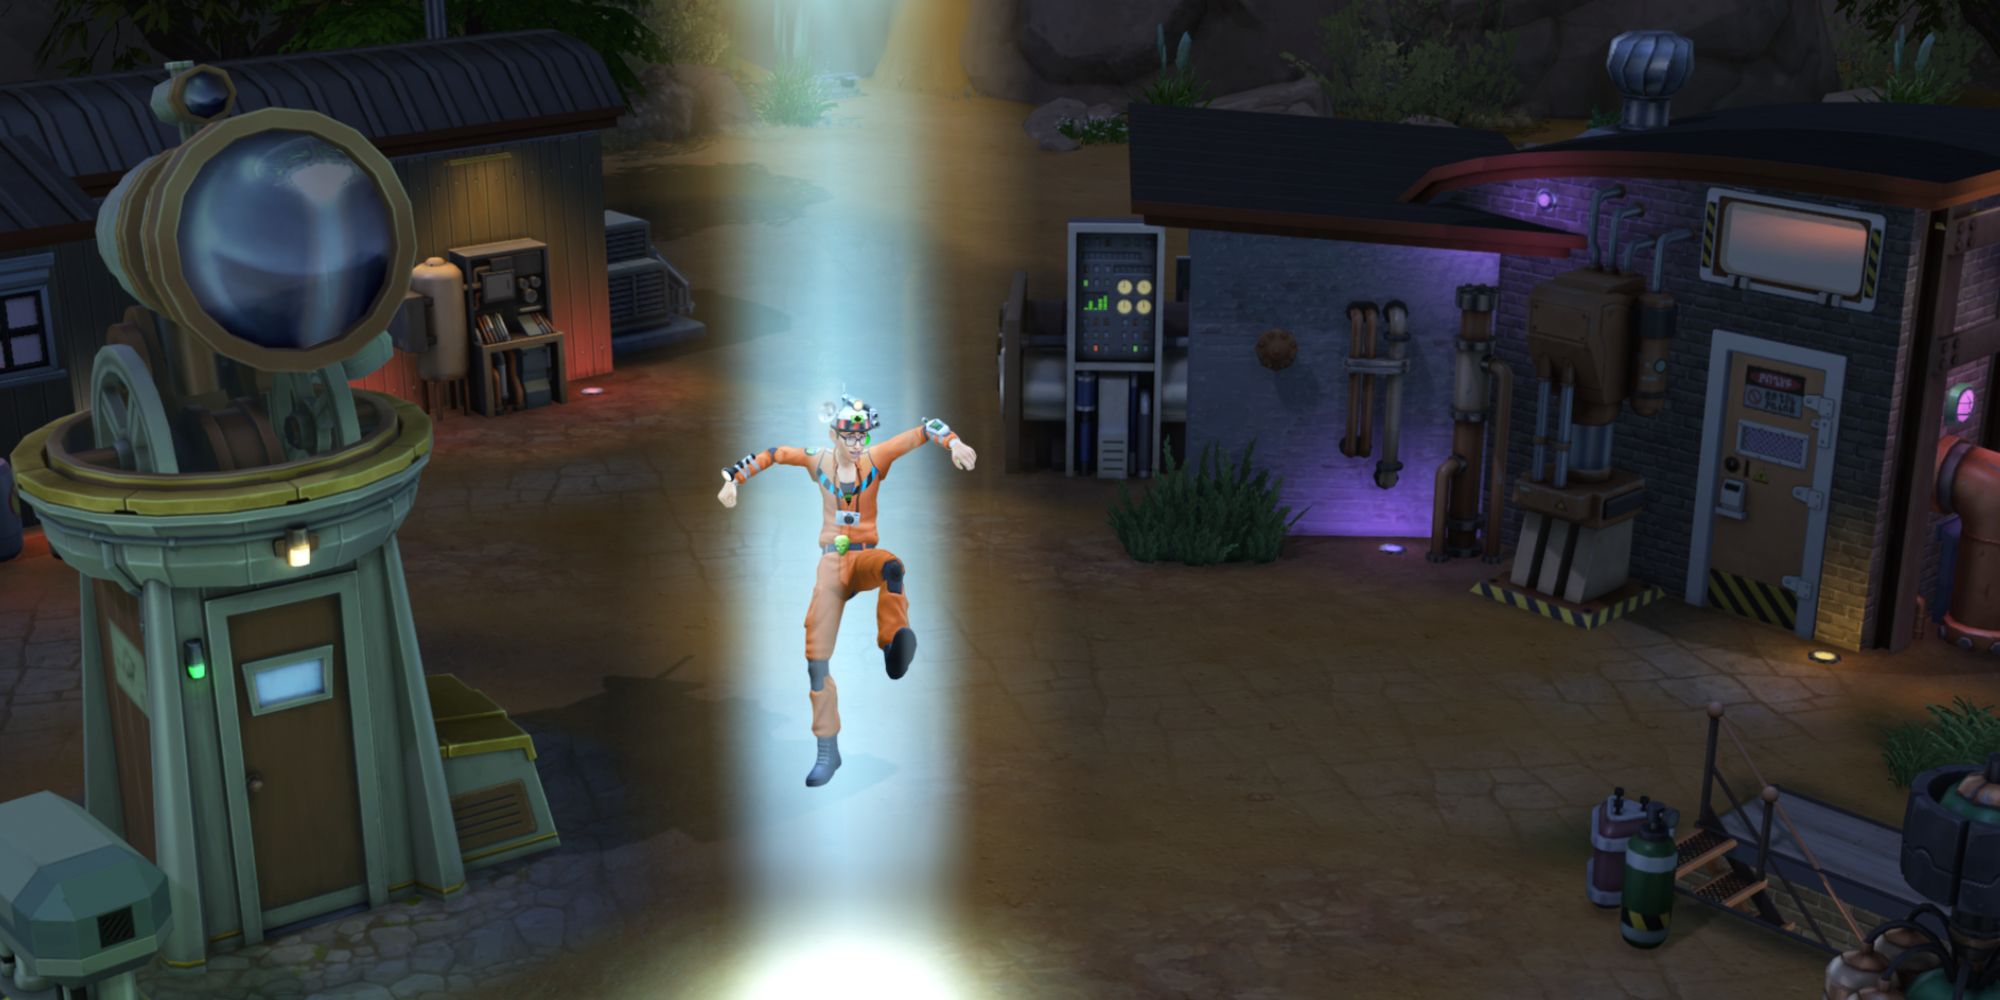 Sims 4 get to work alien abduction